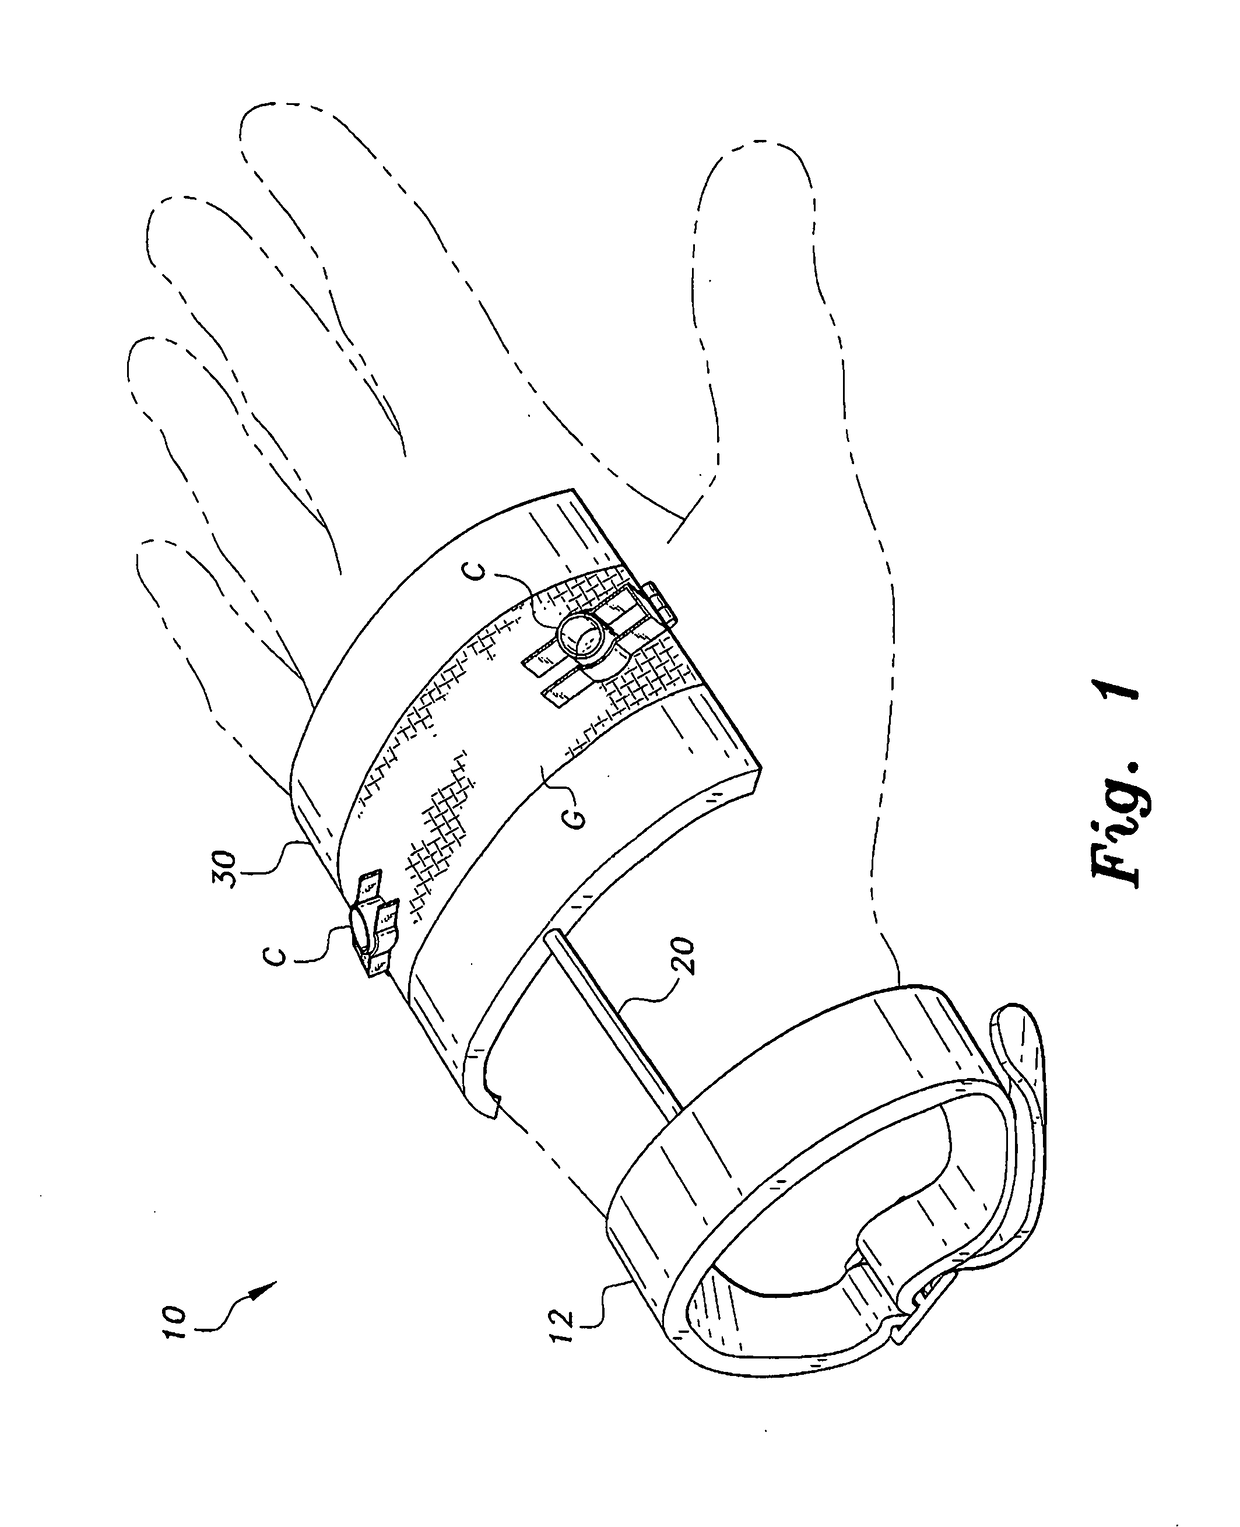 Wiping device for dental tools